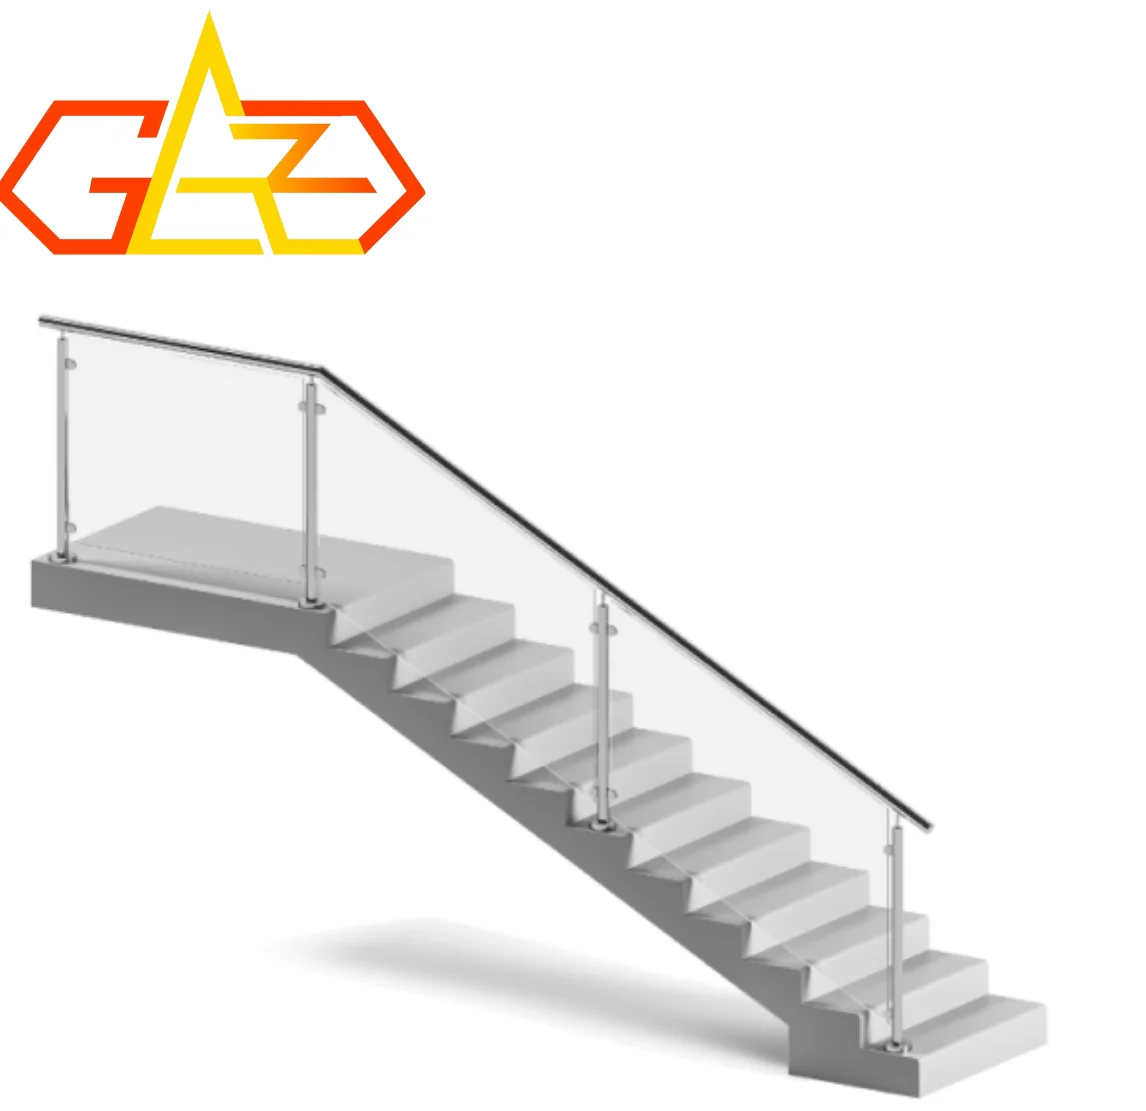 Hot selling stainless steel stair guardrail park railing balcony railing design